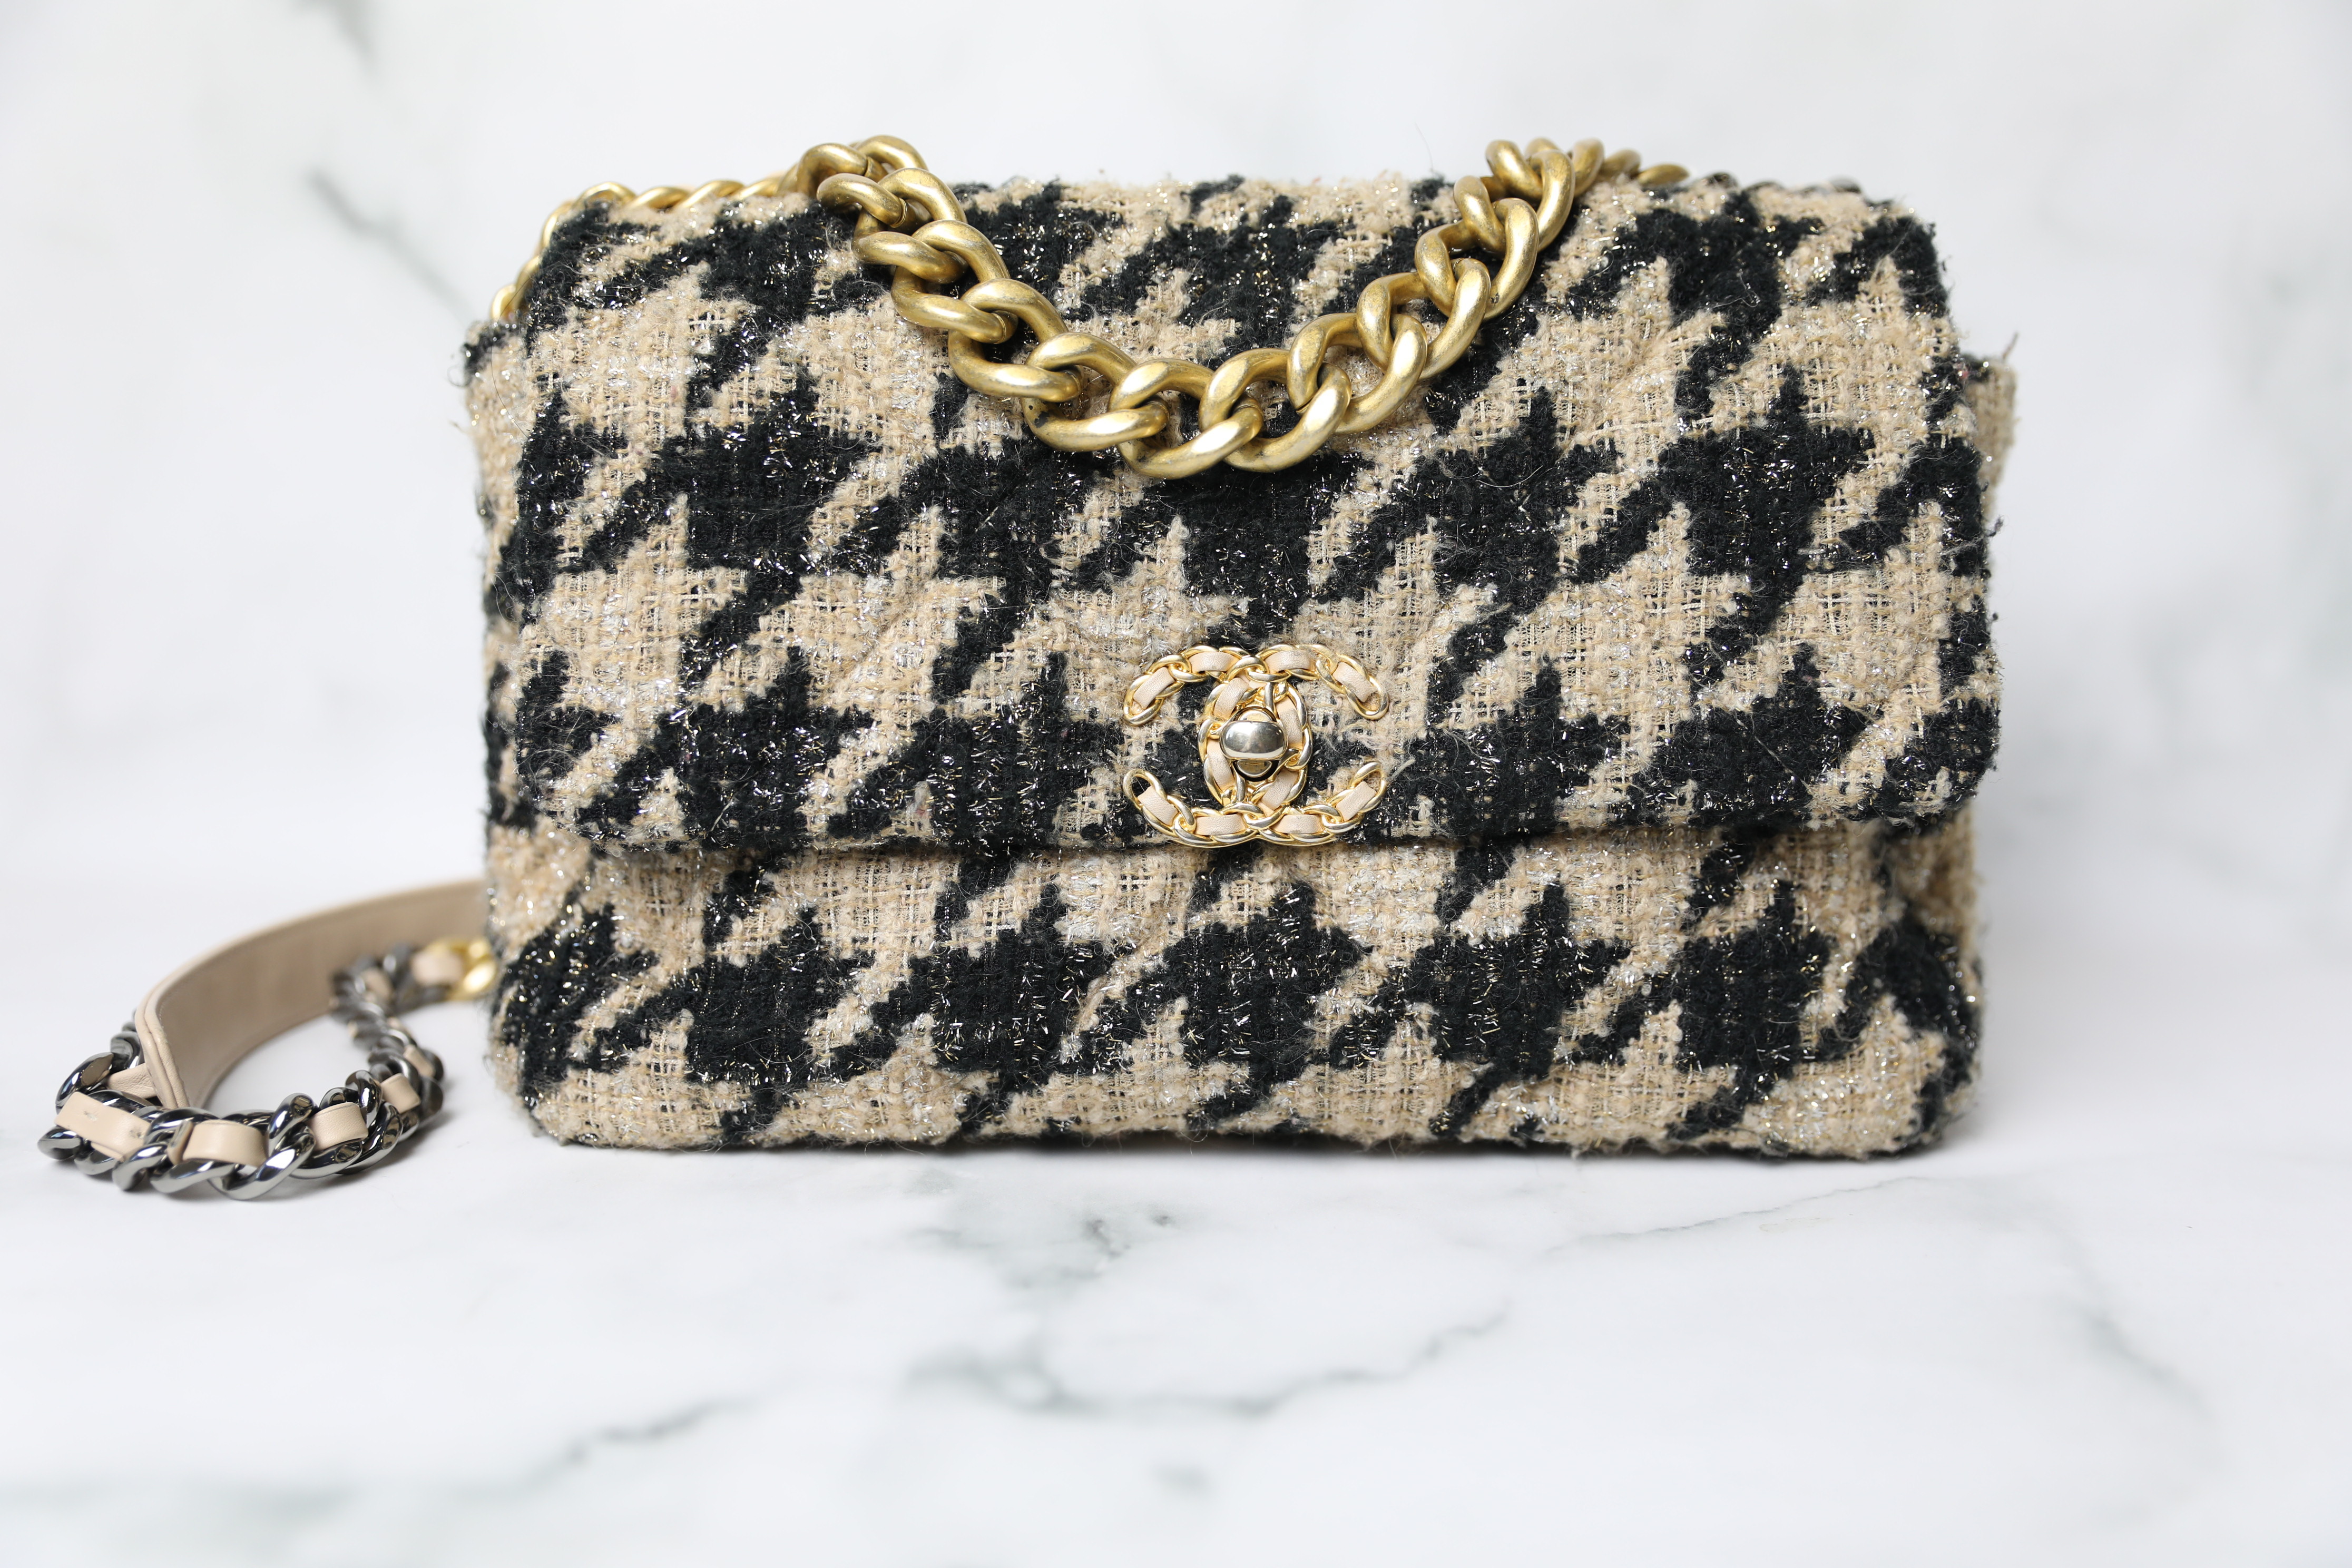 Chanel 19 Jumbo, Beige and Black Houndstooth Tweed, Preowned in Box WA001